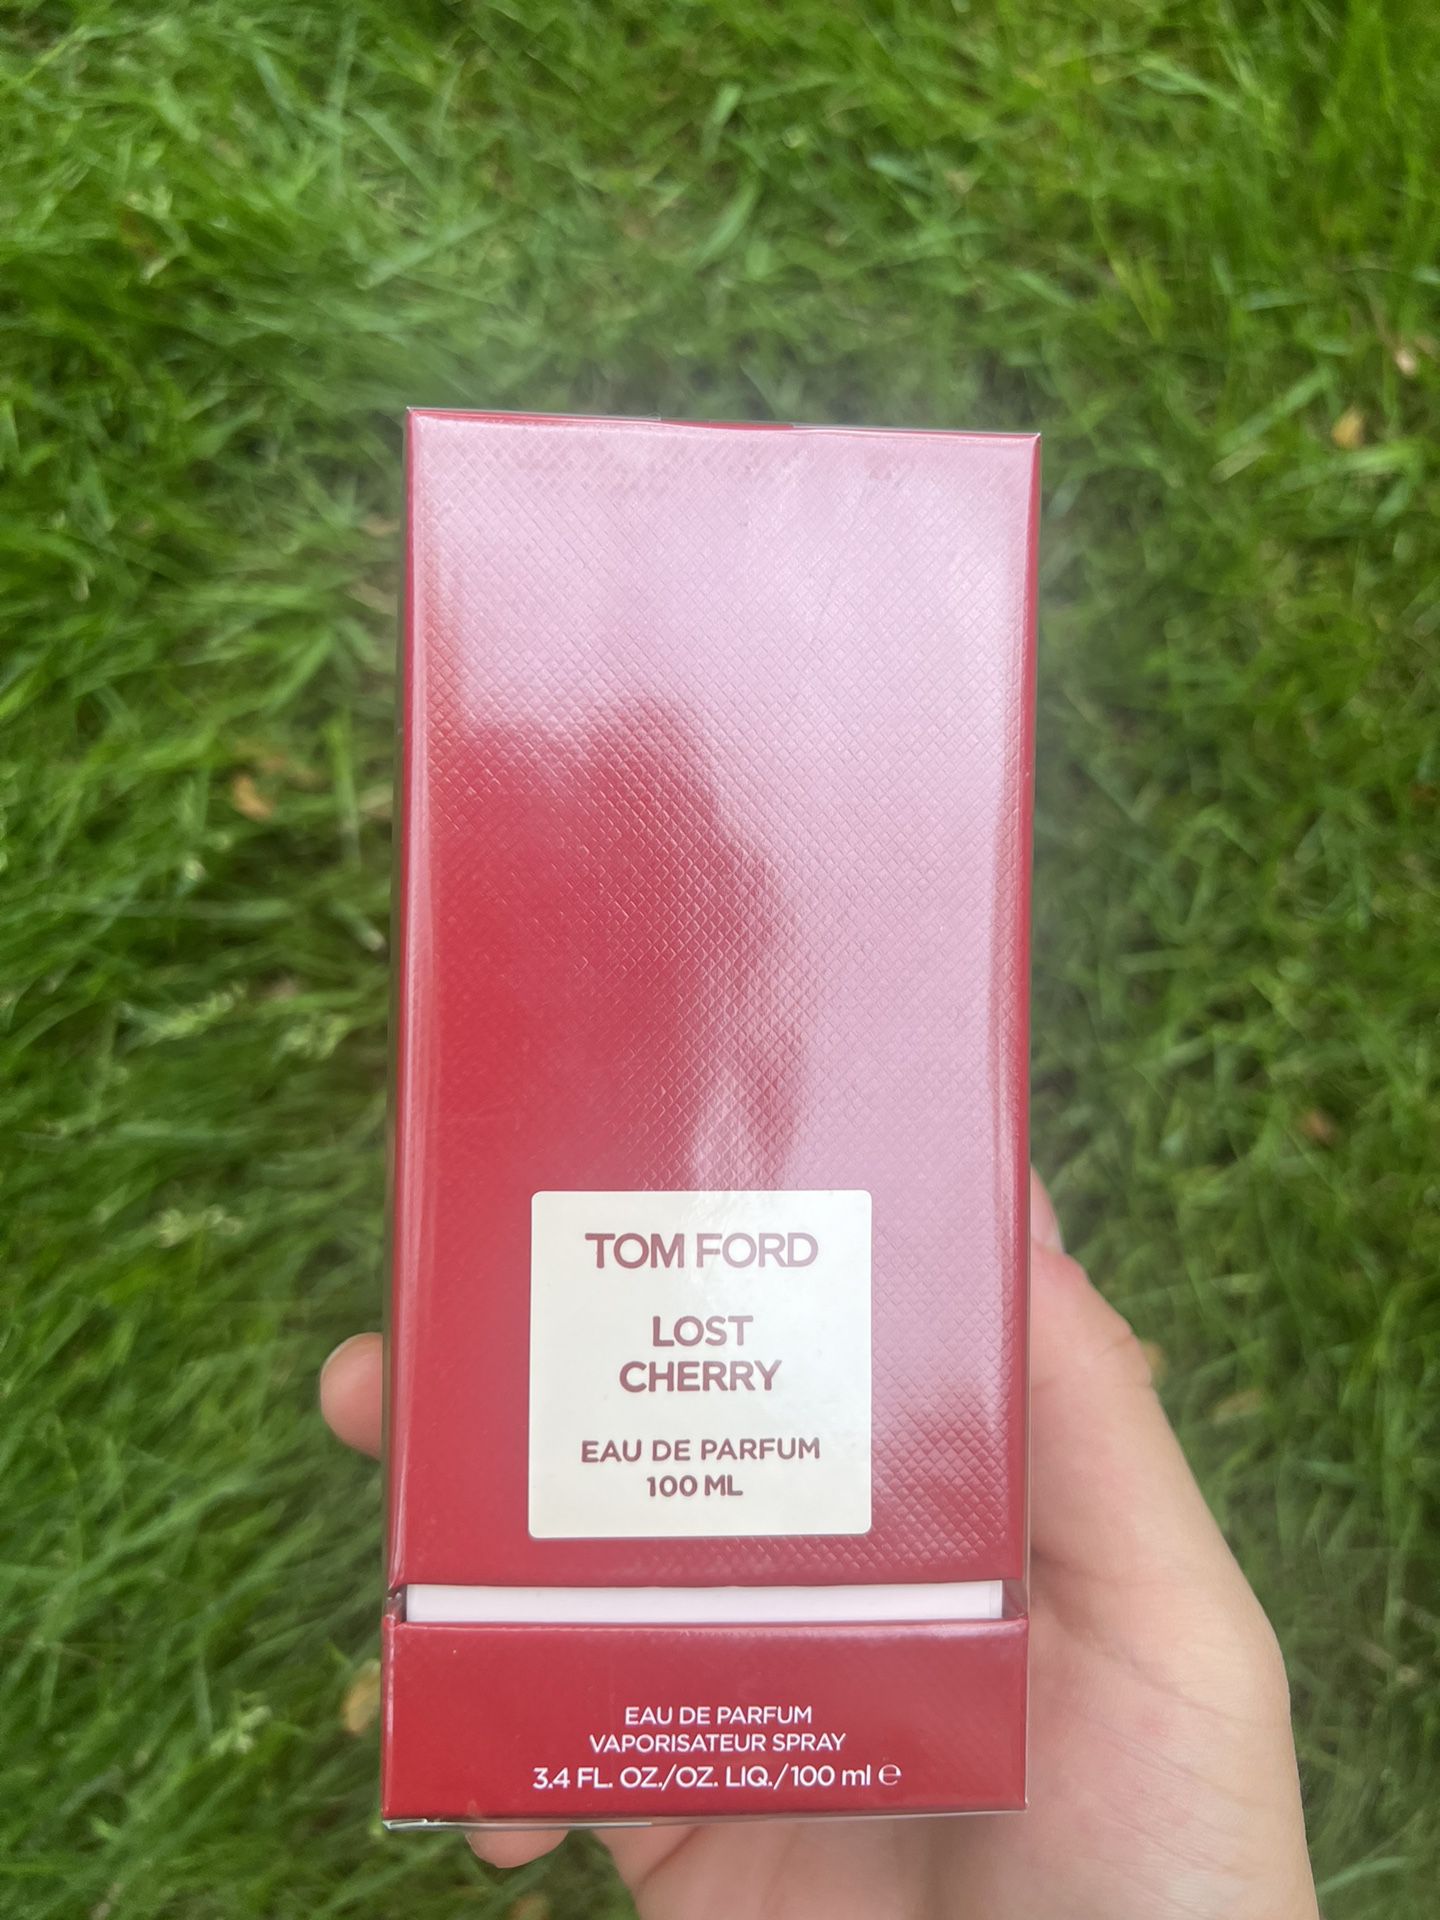 Tom Ford “ Lost Cherry” Cologne